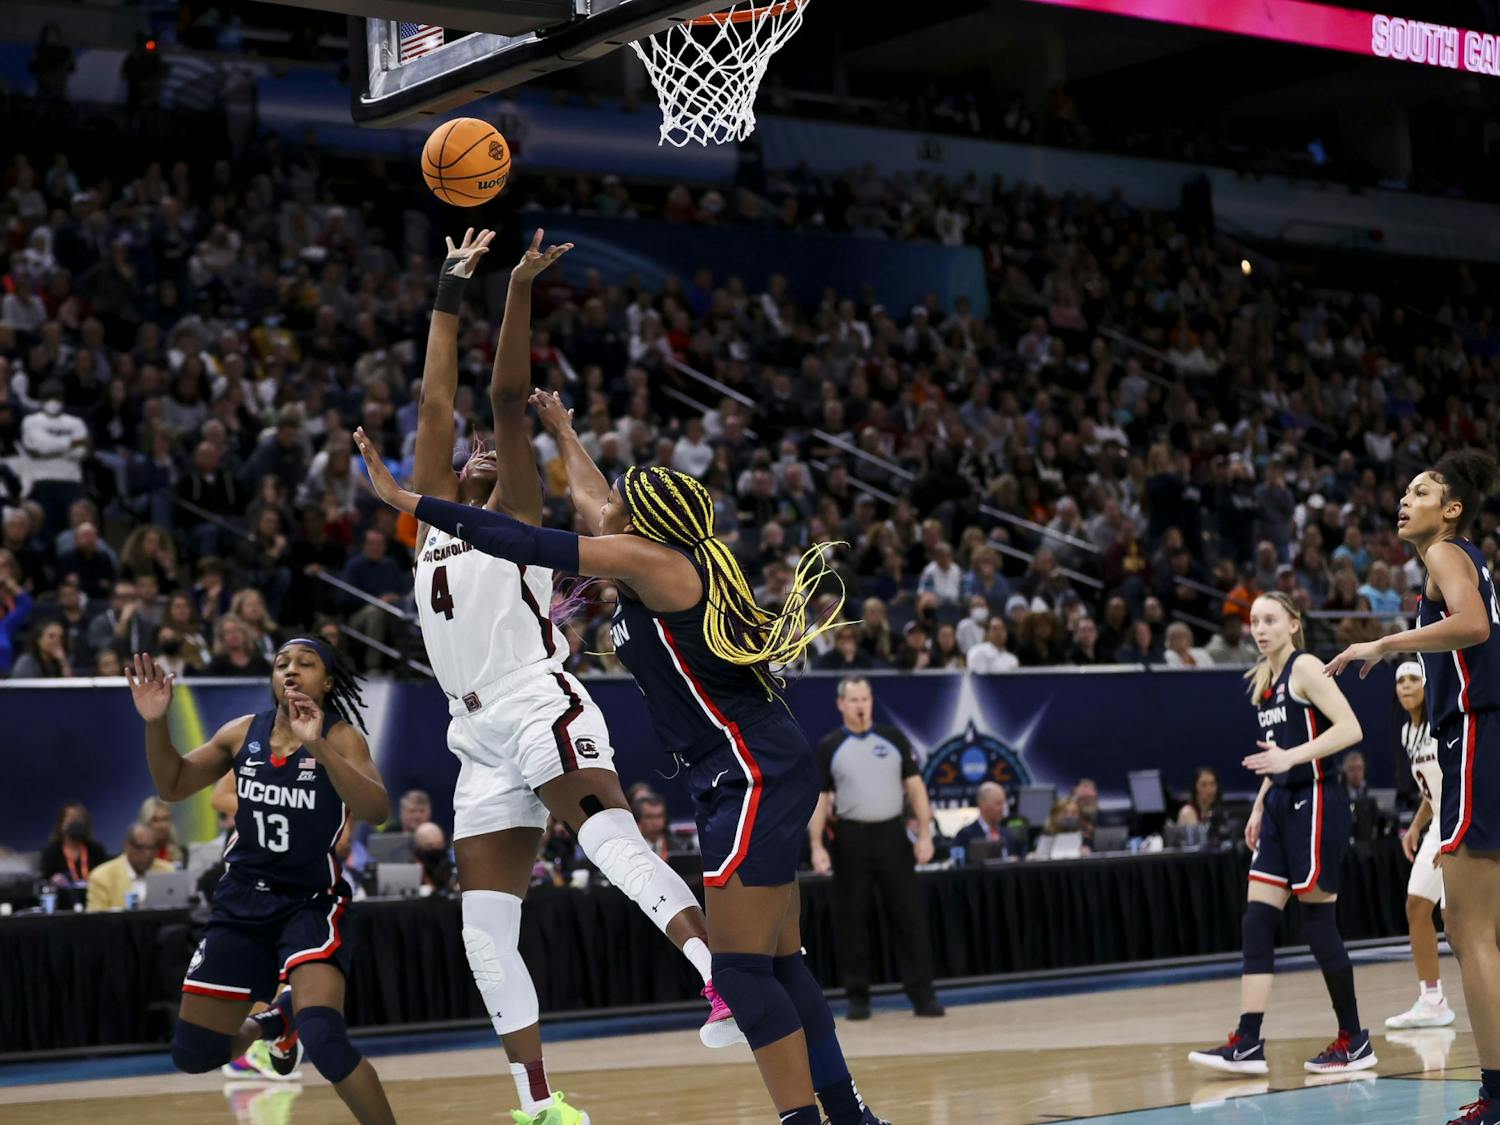 Junior forward Aliyah Boston goes for a layup during the second quarter of South Carolina's 64-49 victory over University of Connecticut, winning the 2022 National Championship on April 3, 2022.